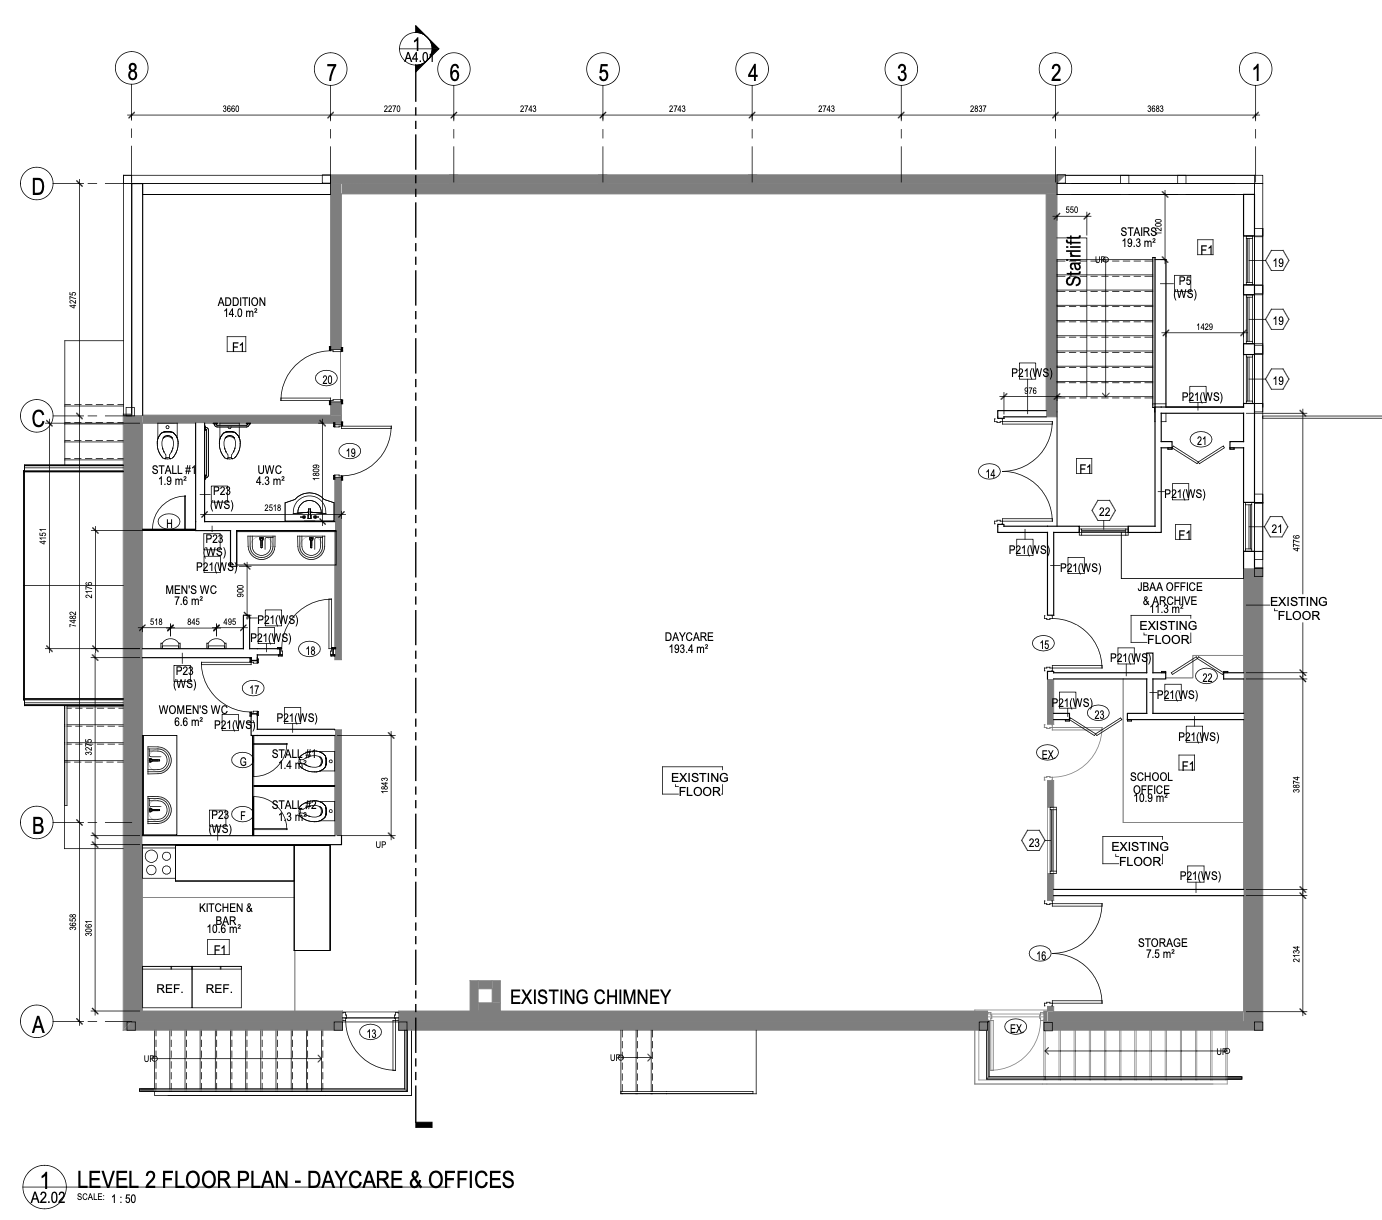 daycare and offices floor plan.png